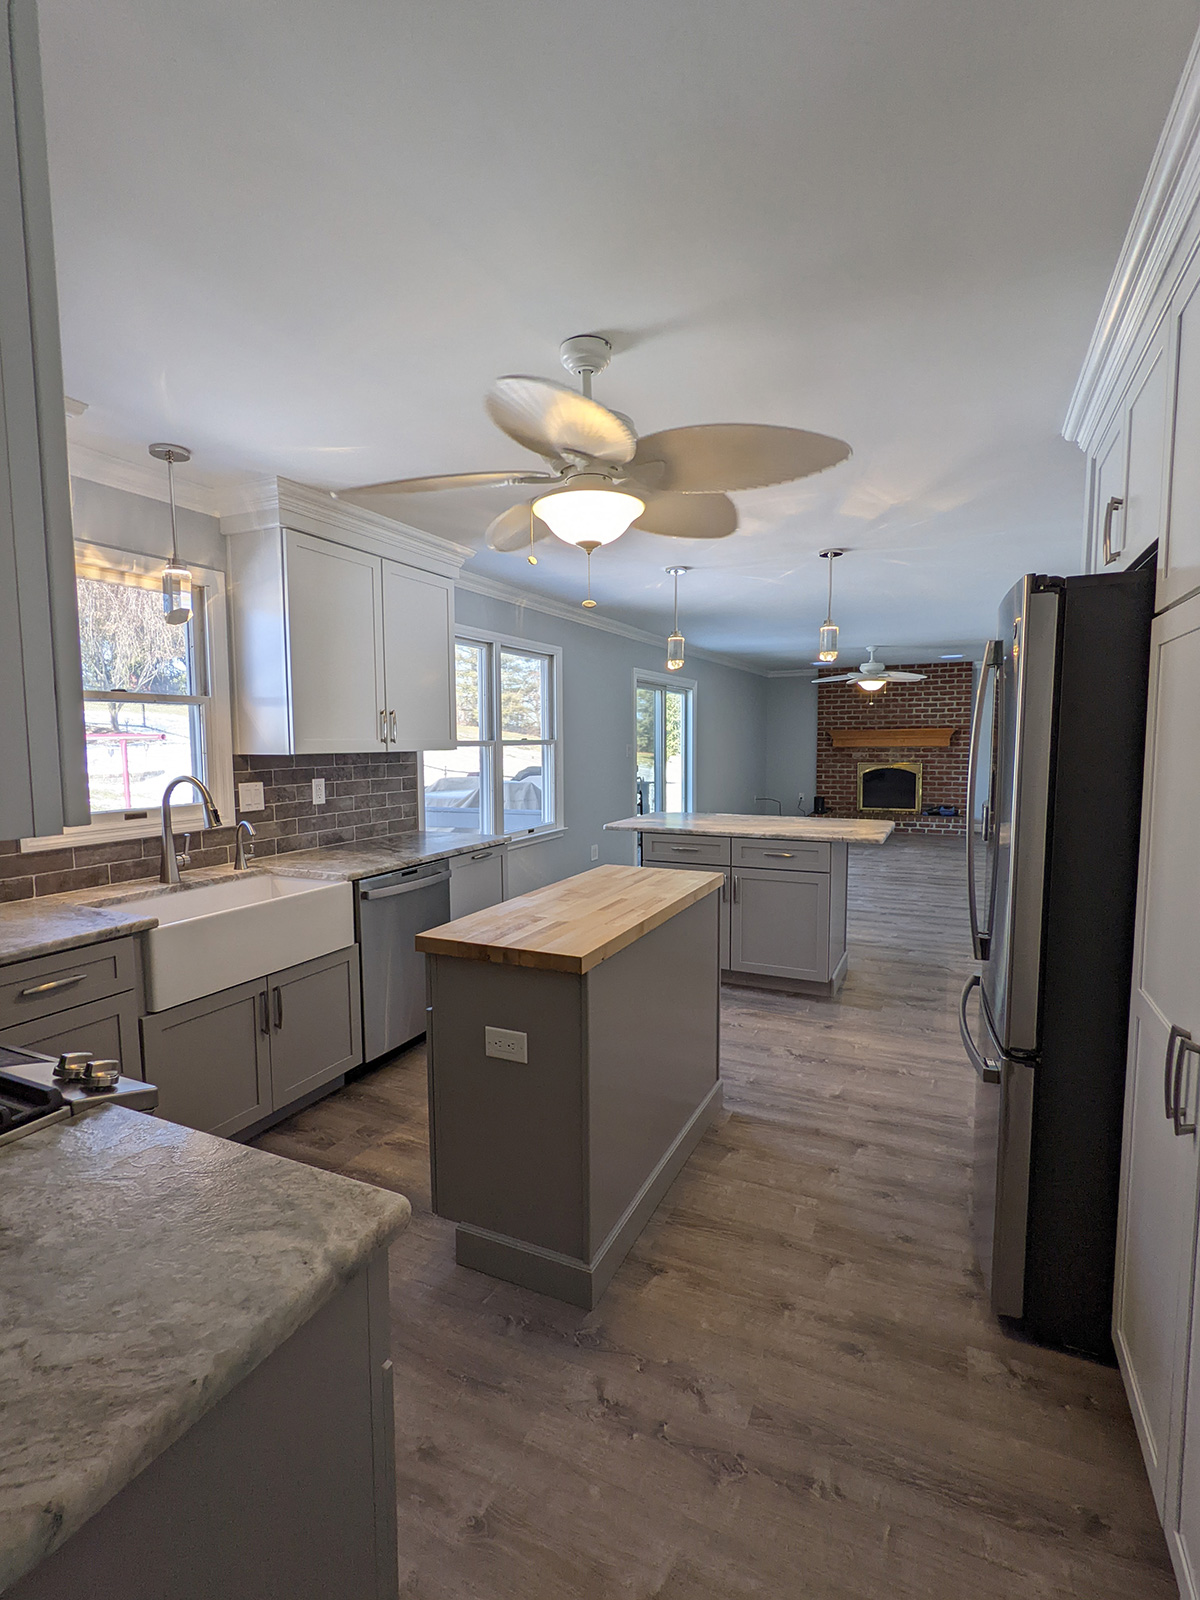 Bringing a Fresh Perspective to a Fleetwood Kitchen